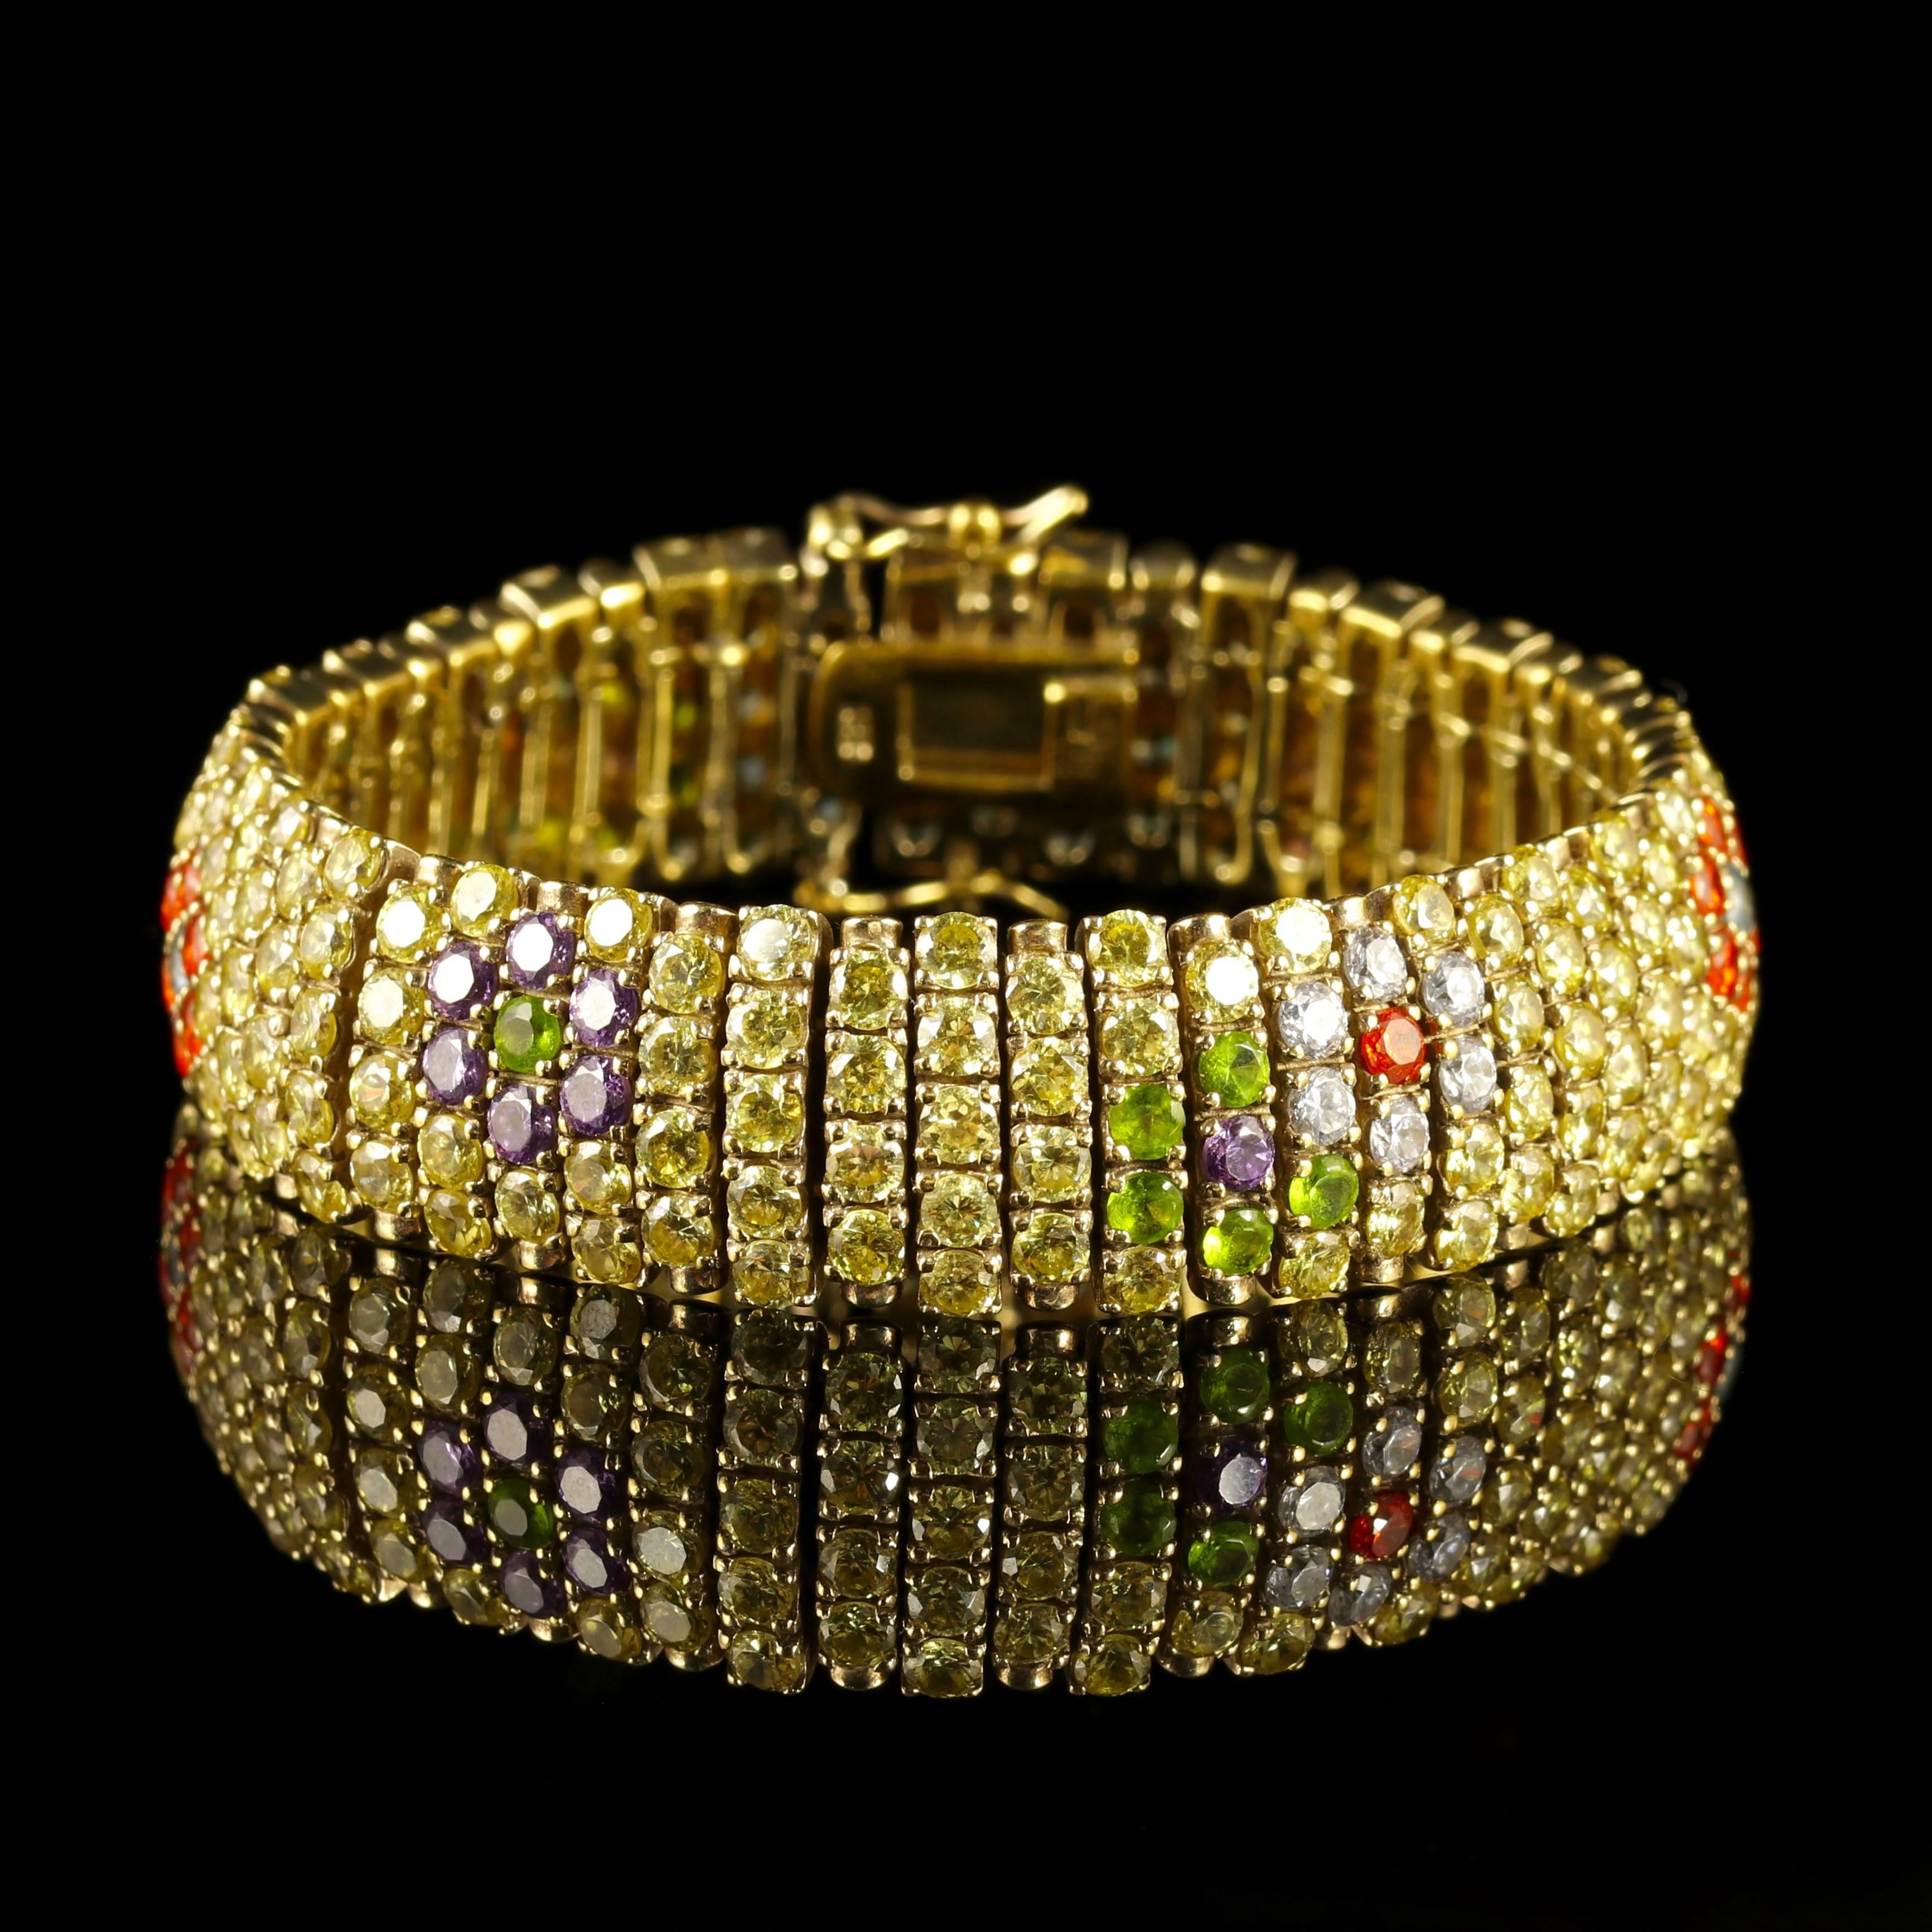 This is one of the most fabulous French Paste bracelets we have had the privilege of purchasing.

A genuine French piece, Circa 1930.

The Bracelet is adorned with lovely colourful Paste Stones in a detailed pave setting of floral motifs in rich